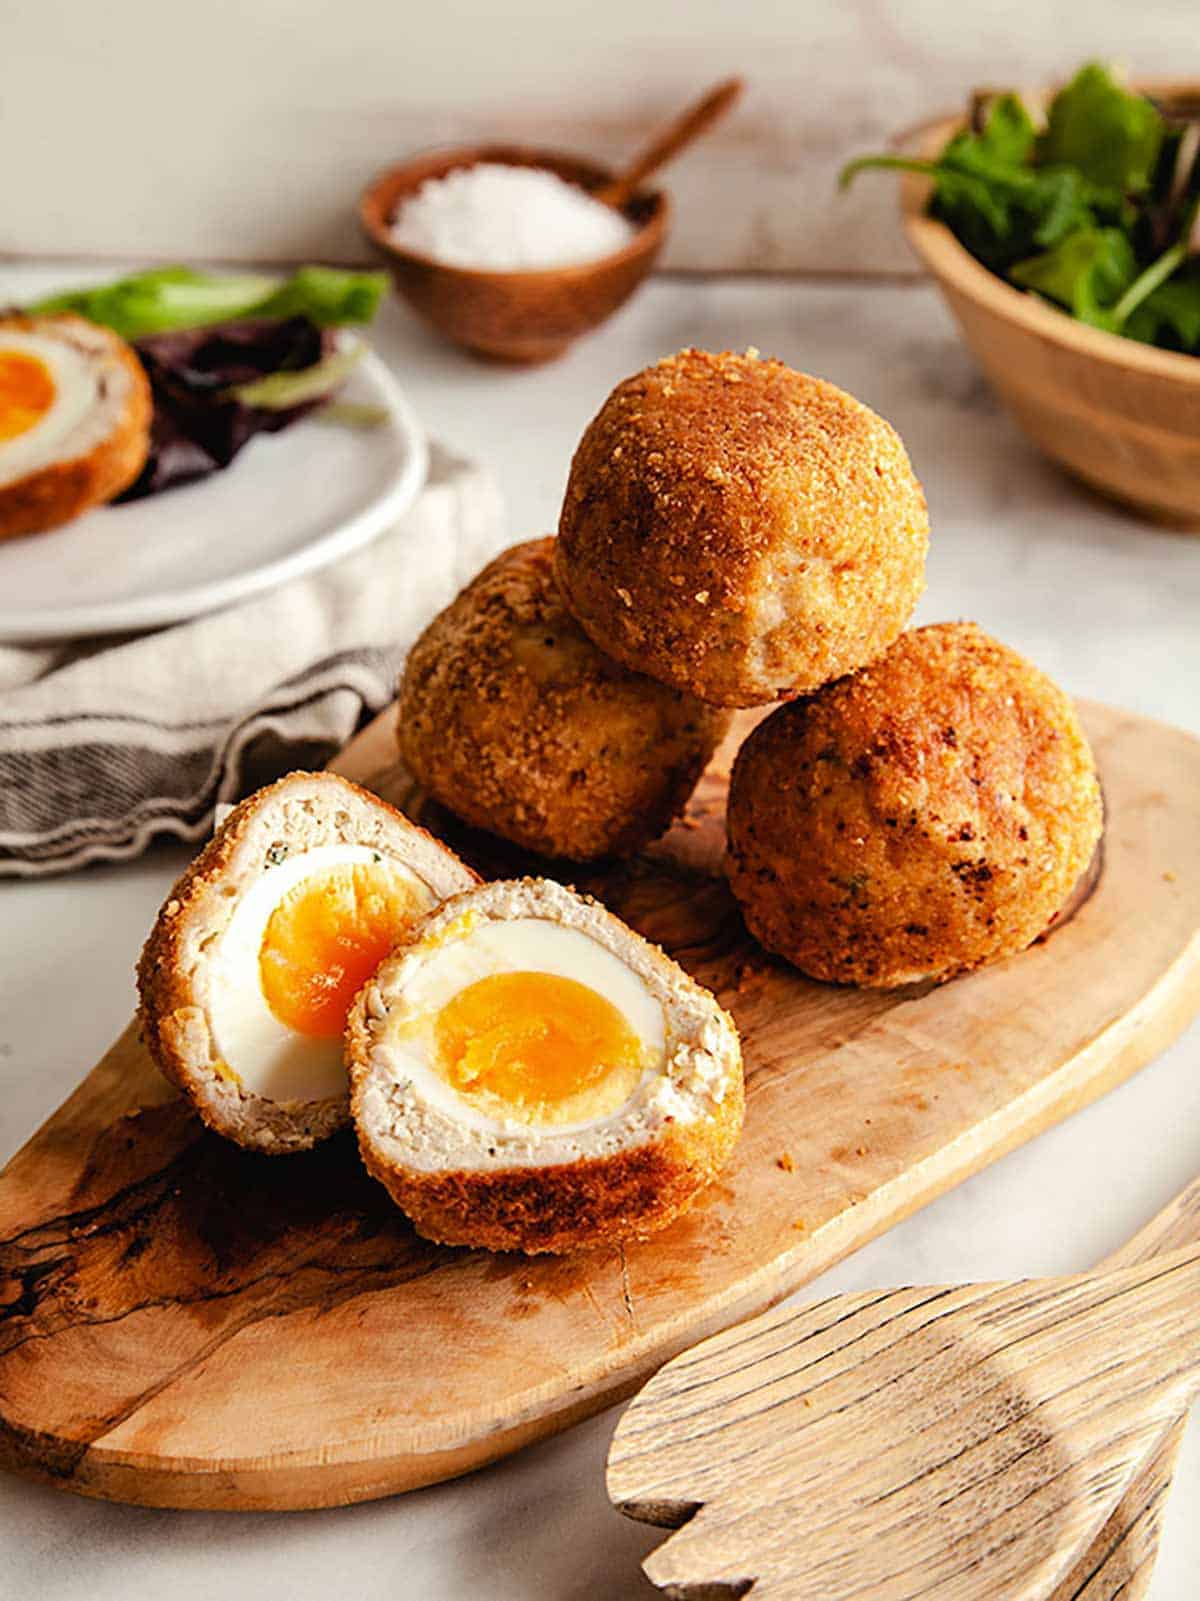 Four scotch eggs on a wooden board with one of the eggs sliced in half showing yellow yolk